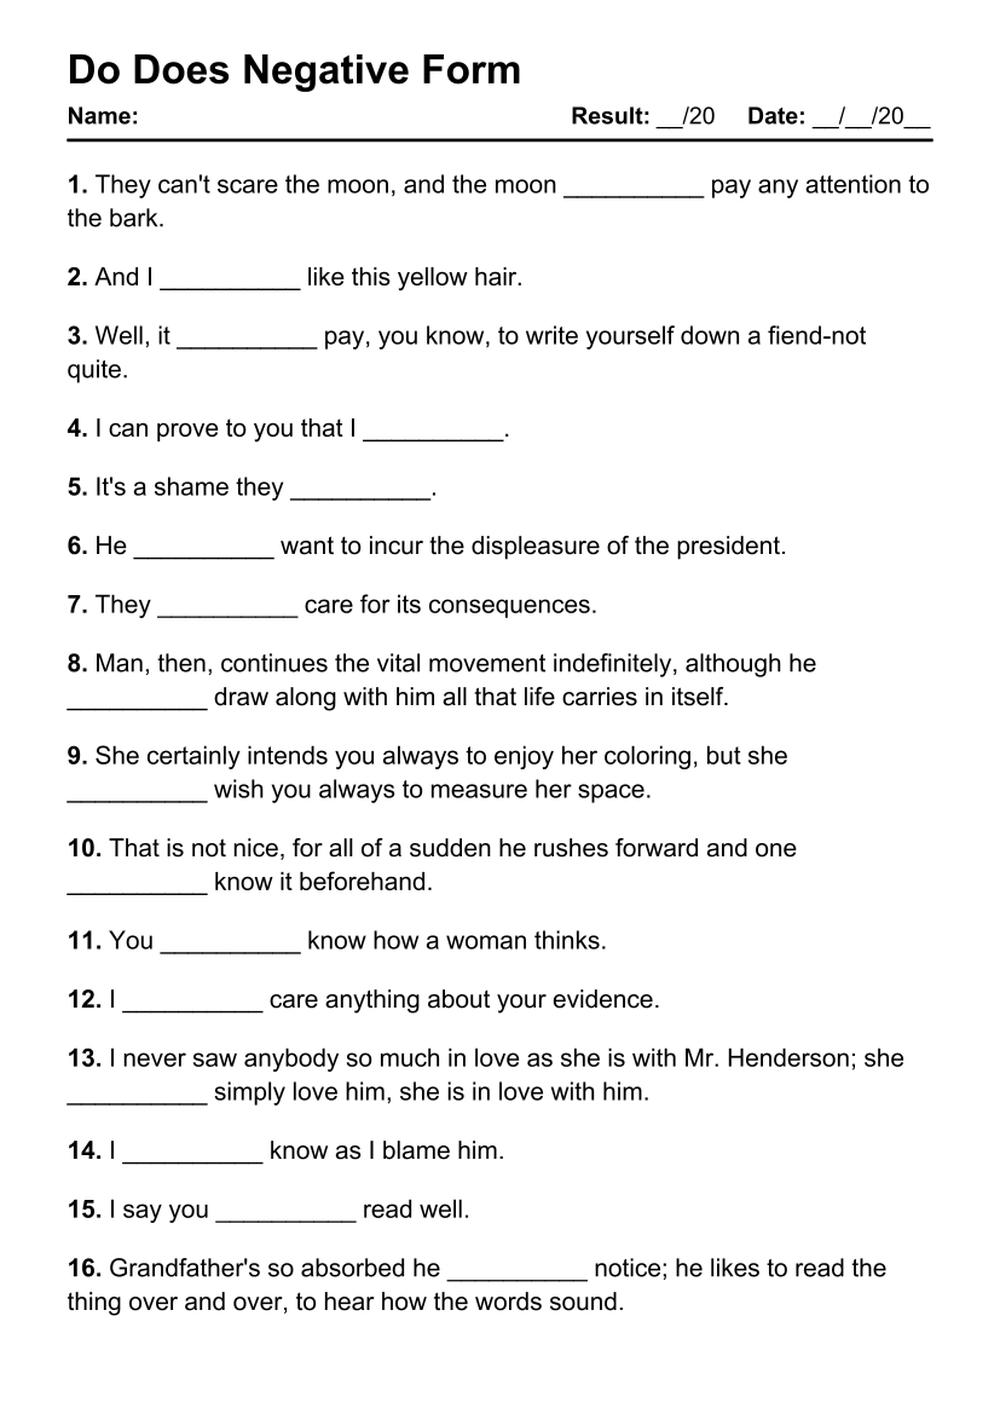 Printable Do Does Negative Exercises - PDF Worksheet with Answers - Test 82